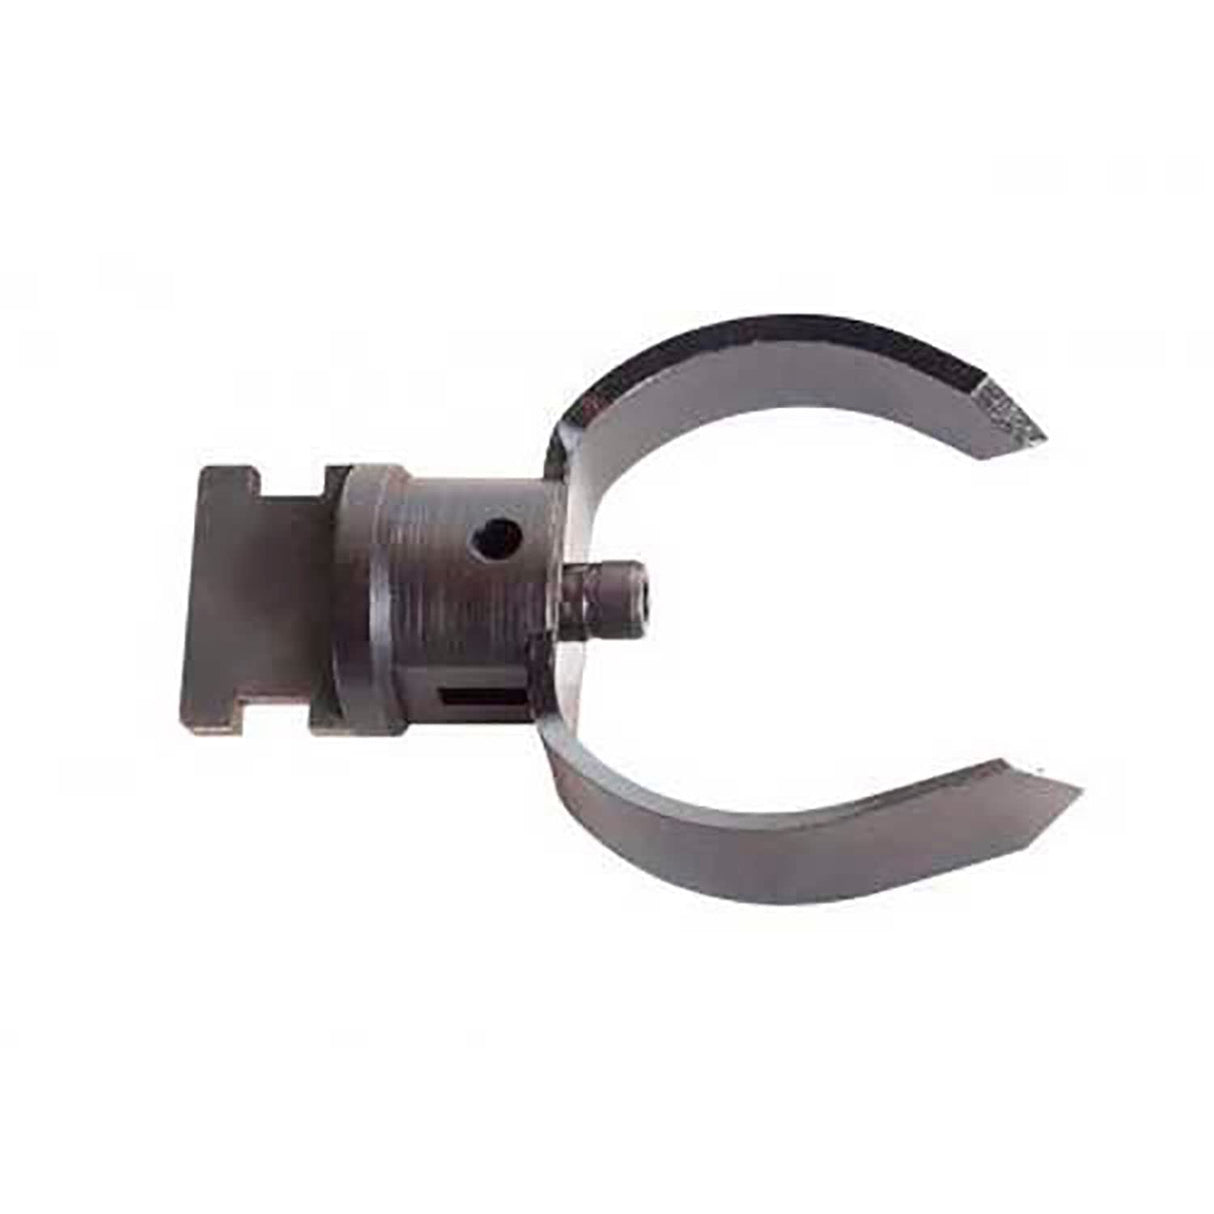 General Wire G-3HDSC 3" Heavy Duty Side Cutter - for 1-1/4" General® Cables